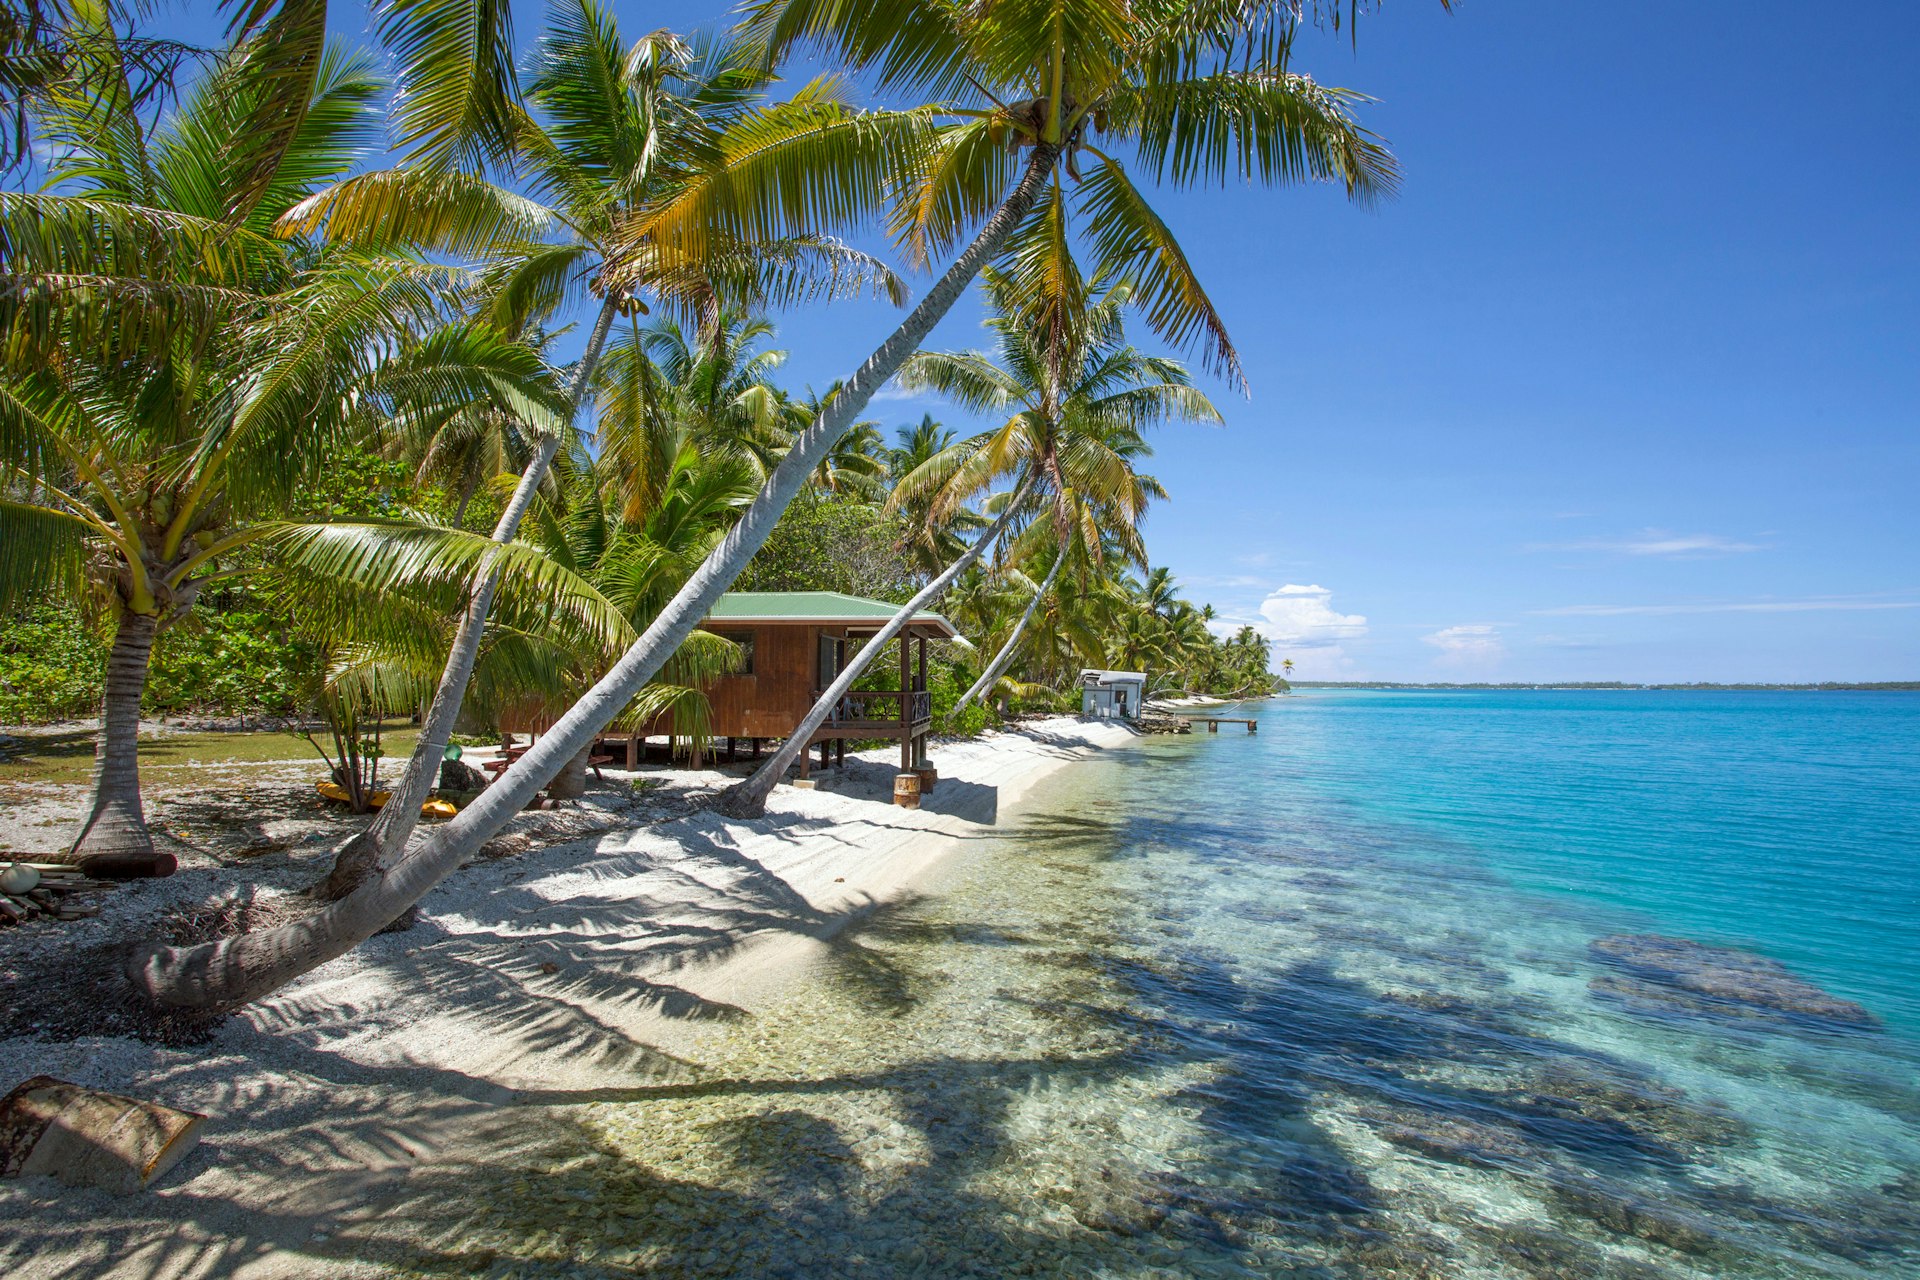 Palm trees and a small hut on the Manihiki coastline in the Cook Islands